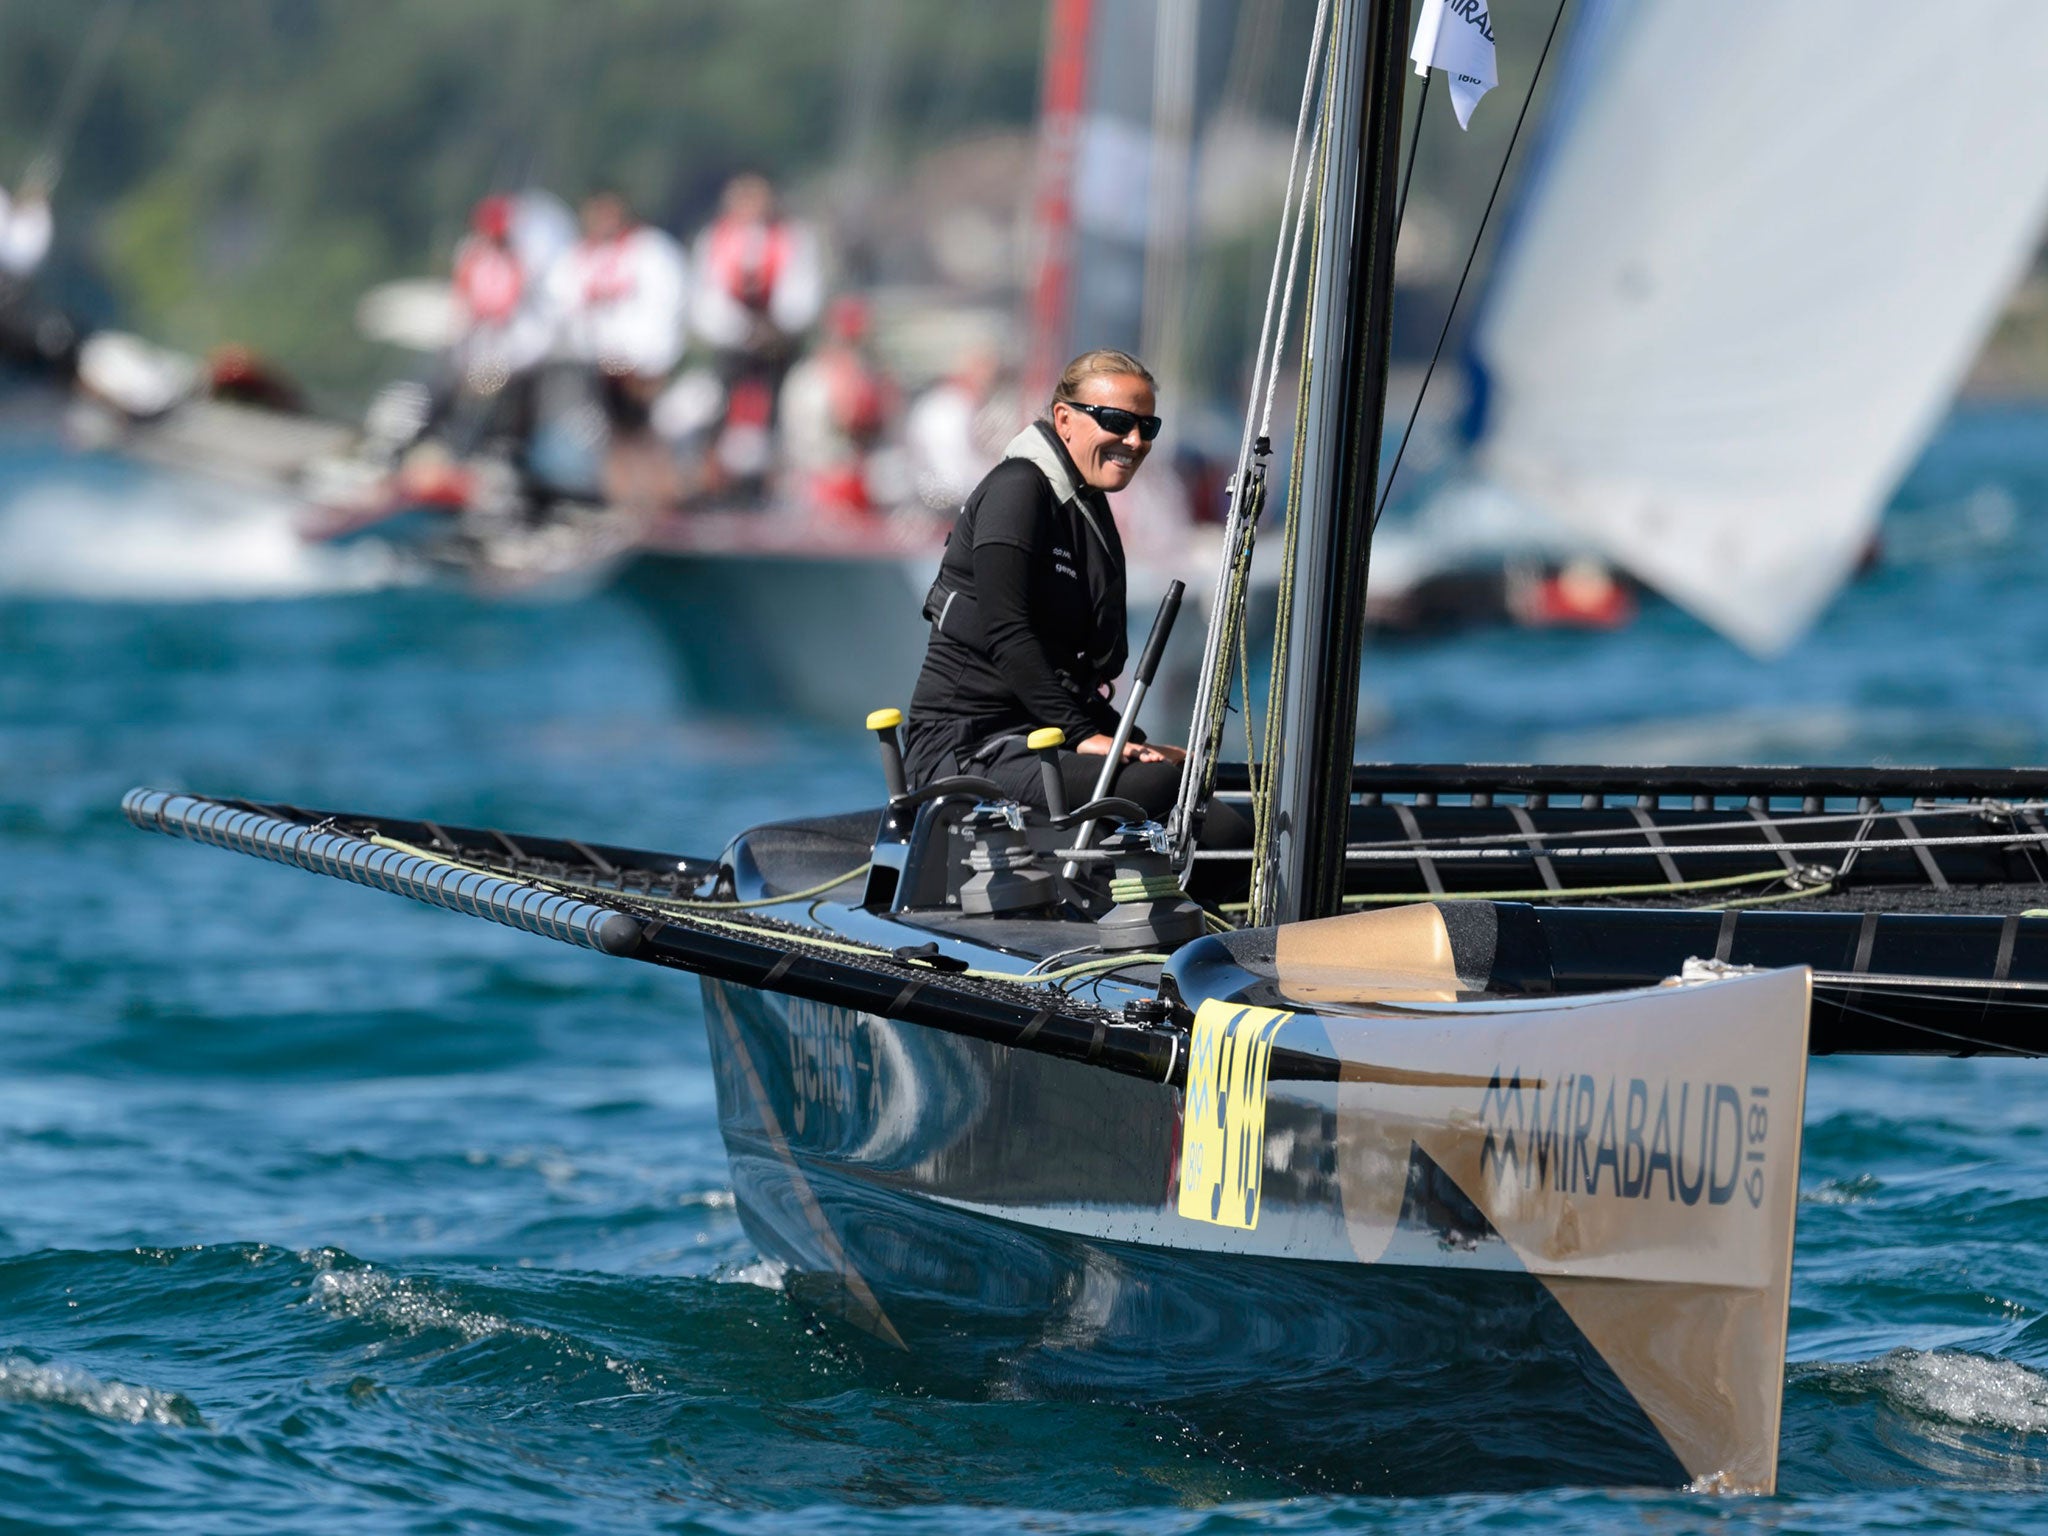 Dona Bertarelli smiles onboard of the D35 Ladycat powered by Spindrift Racing